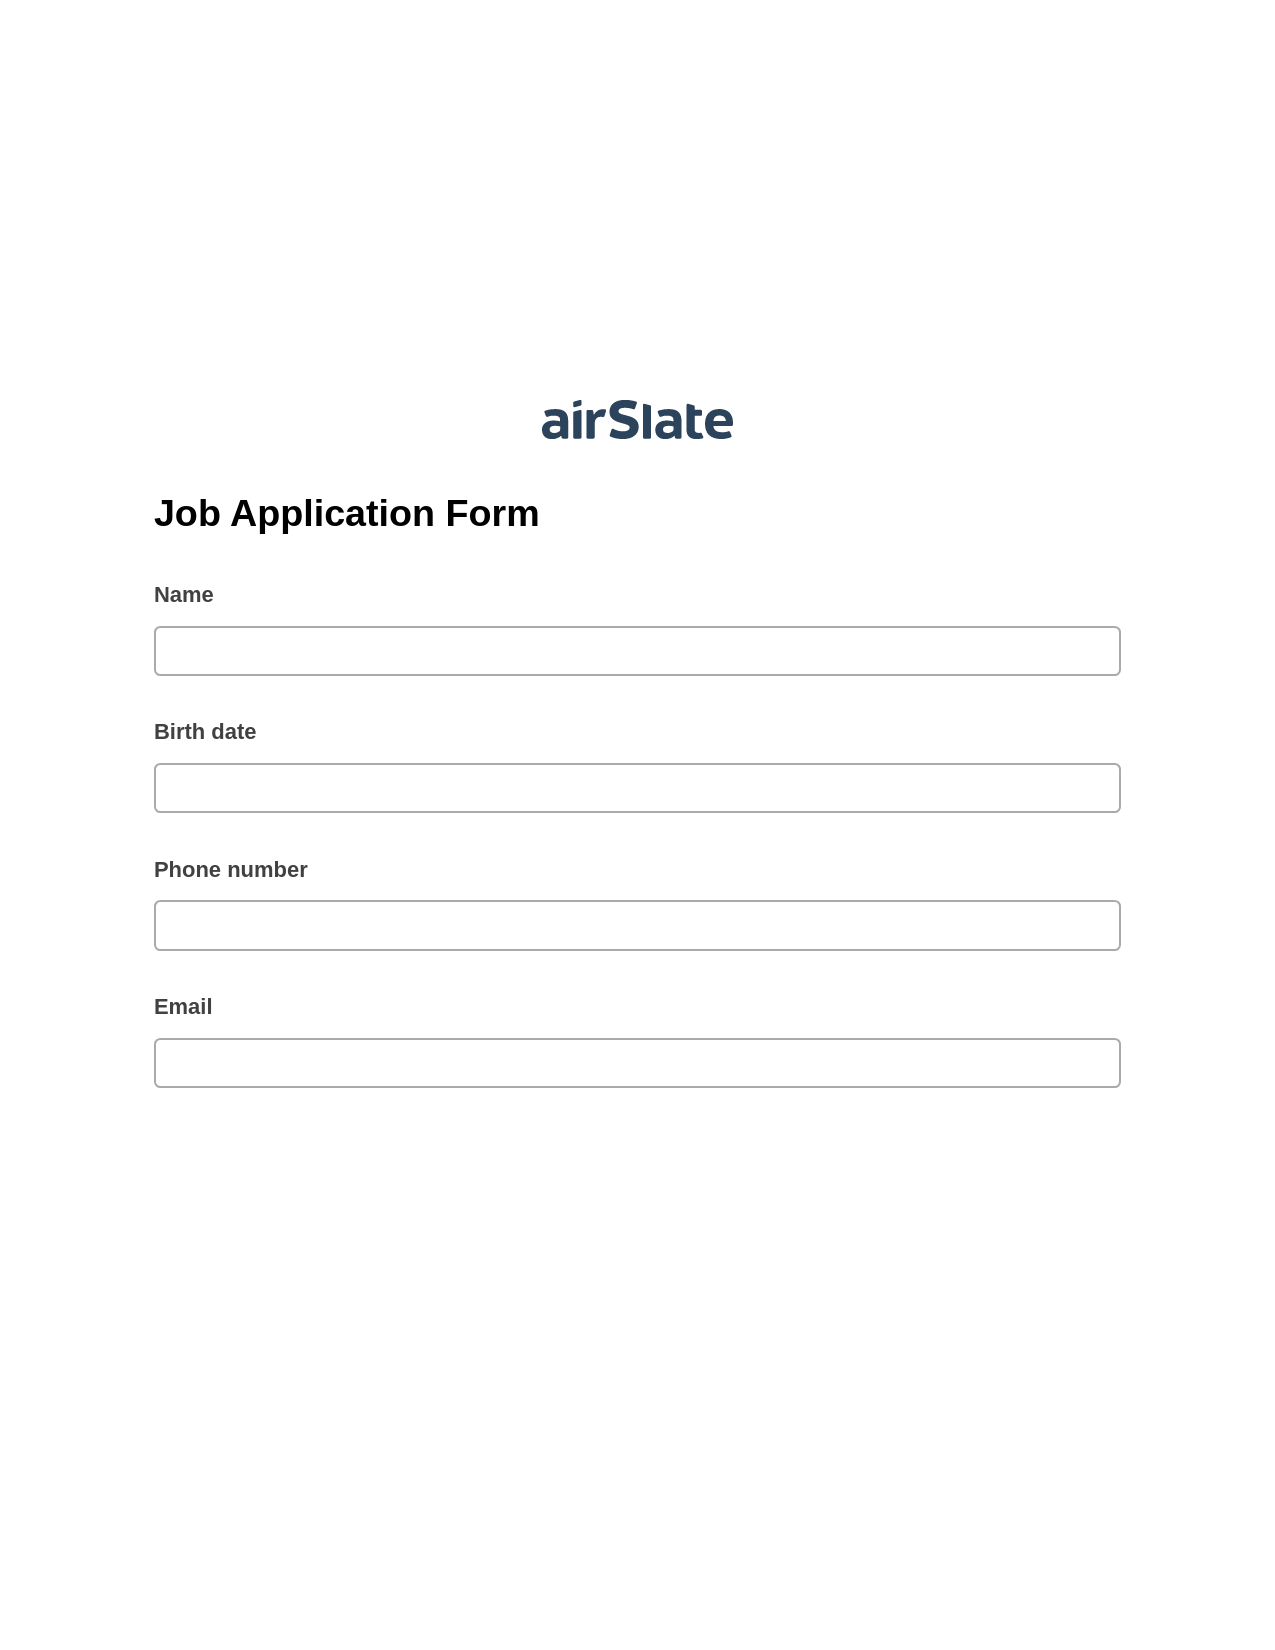 Multirole Job Application Form Pre-fill from CSV File Dropdown Options Bot, Create Slate Reminder Bot, Export to Excel 365 Bot